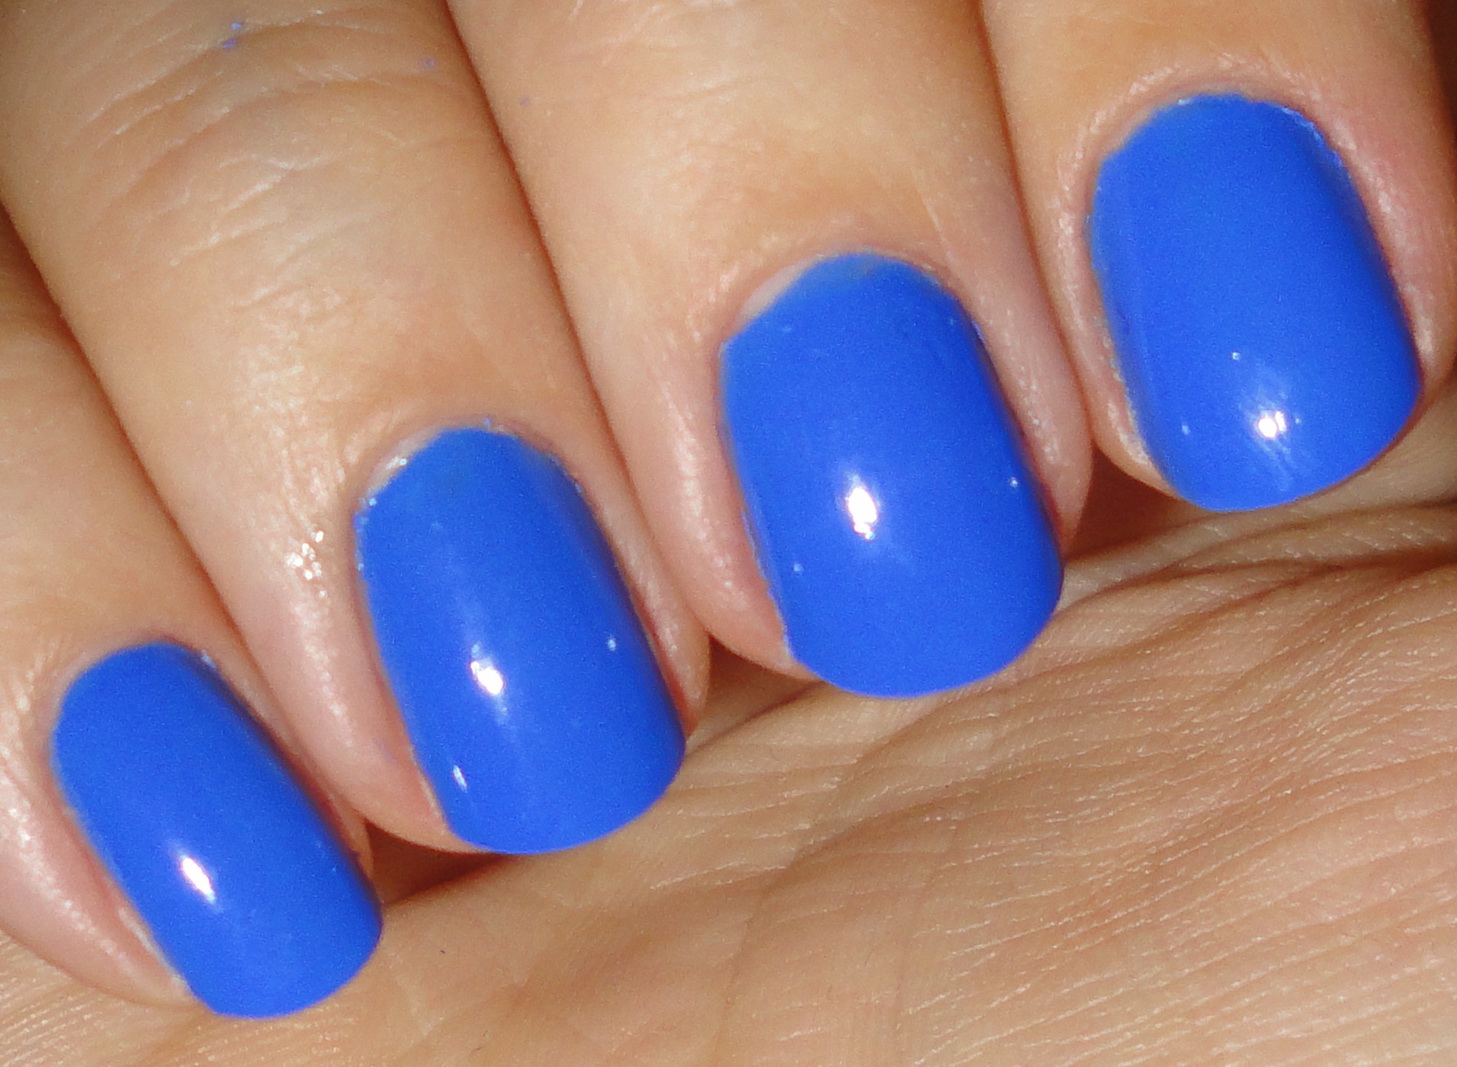 5. "Dark Skin Tones and Blue Nail Polish: What Works Best?" - wide 9